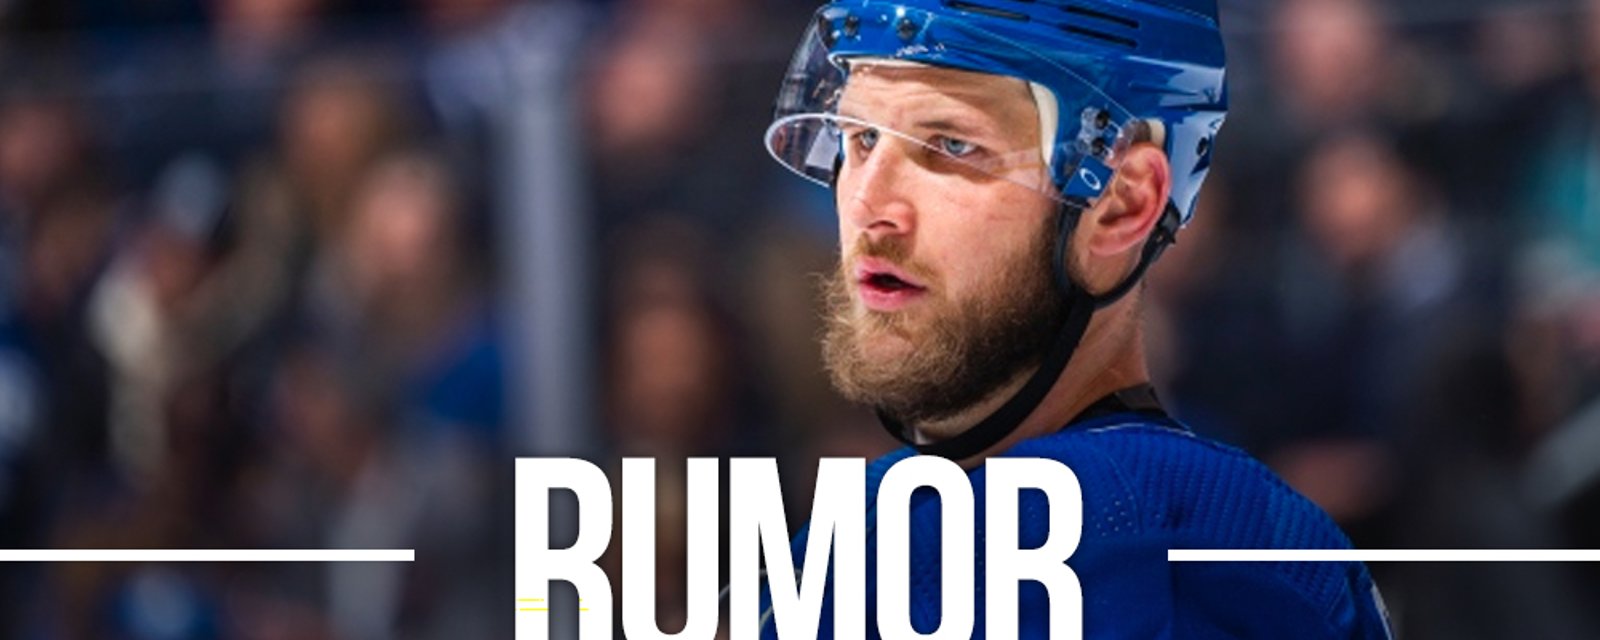 Rumour: All indications are that Kyle Clifford is done with the Leafs